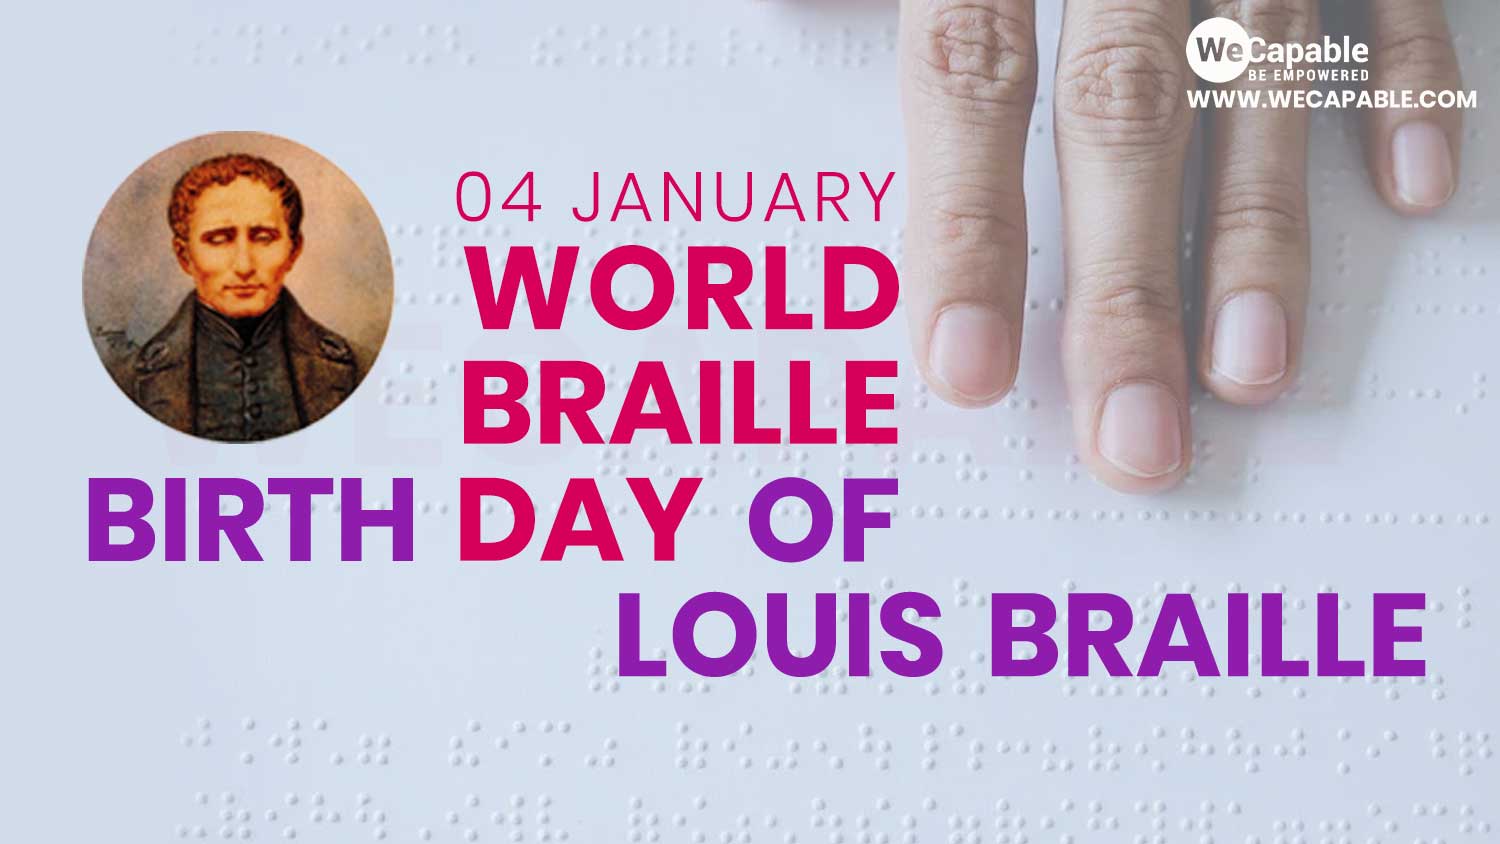 world braille day is celebrate to honor louis braille